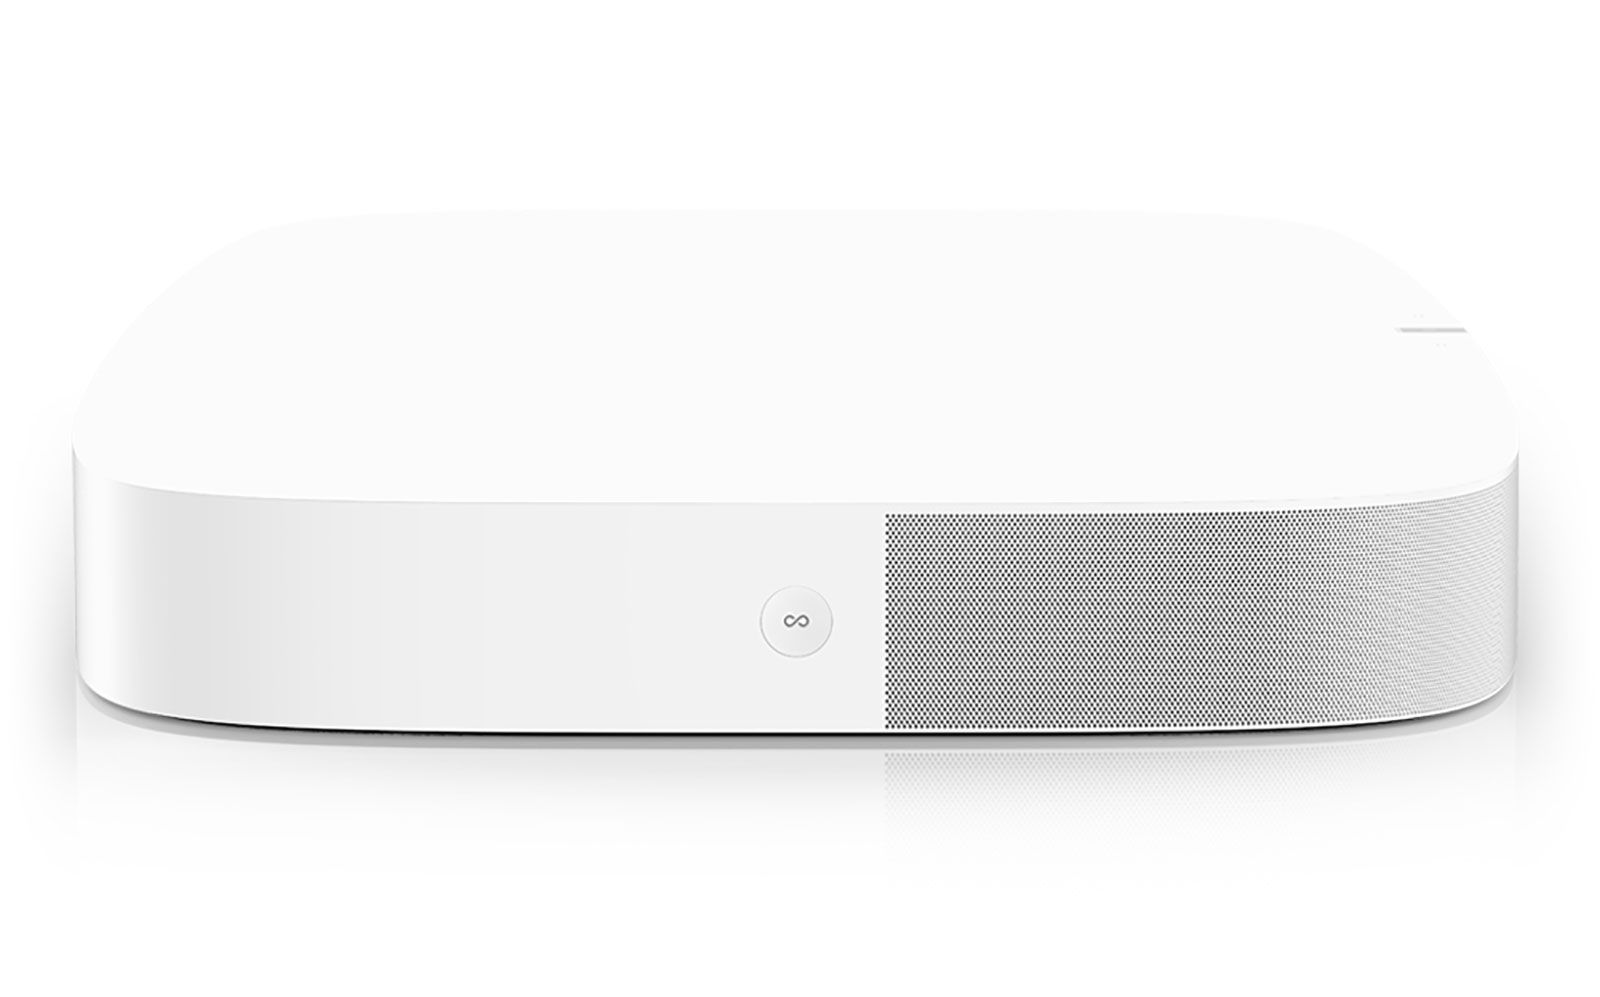 sonos playbase listing leaks online expected in march for 699 image 1